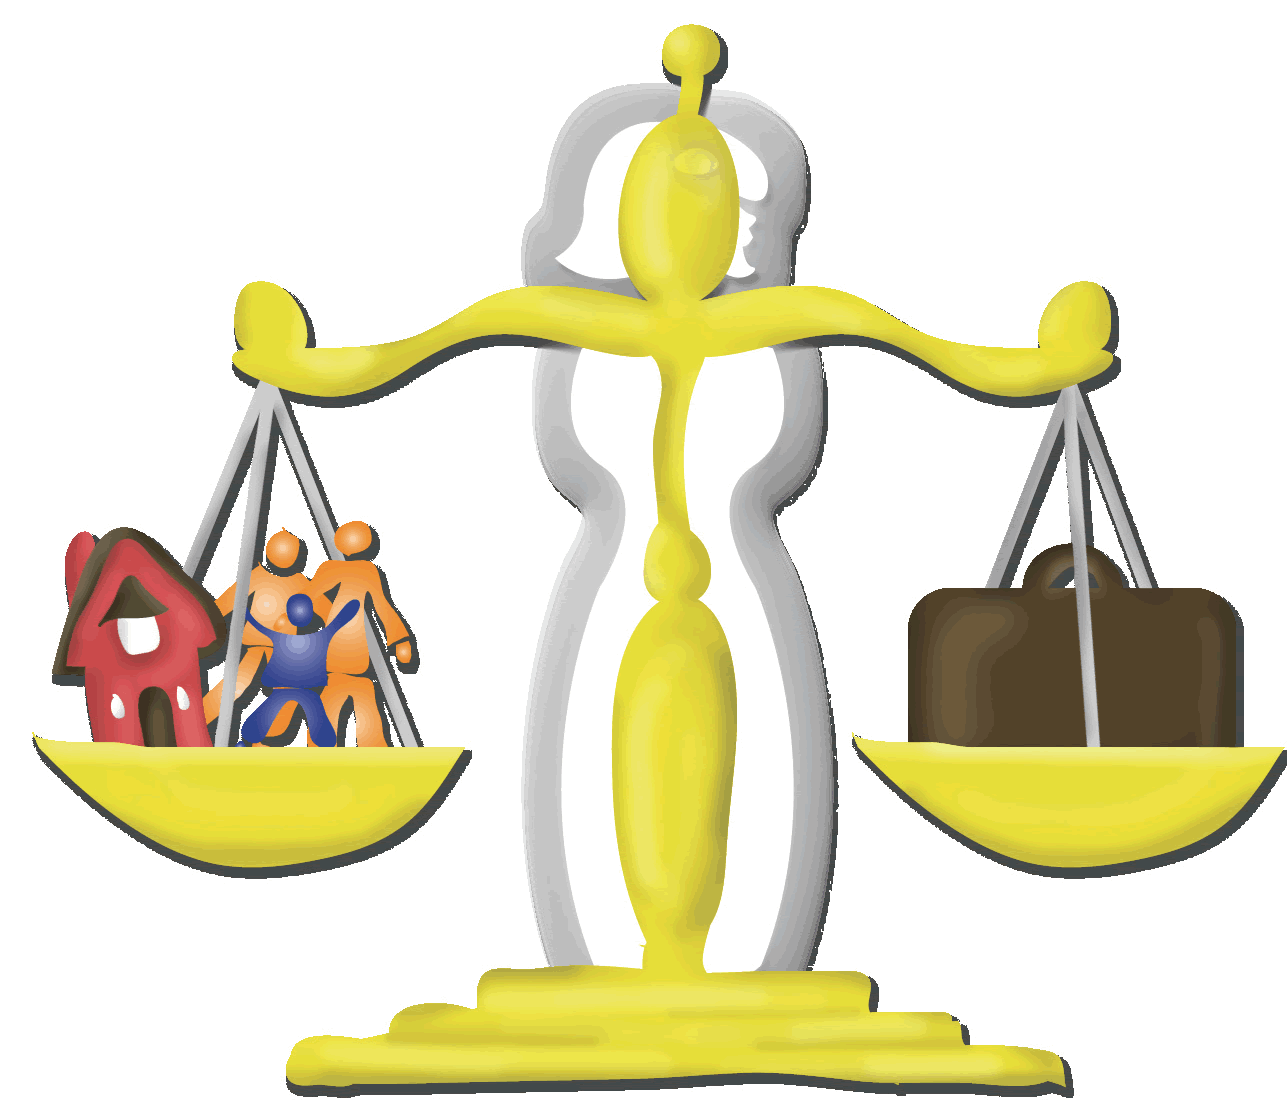 Jail clipart court clerk. Legal terminology image of